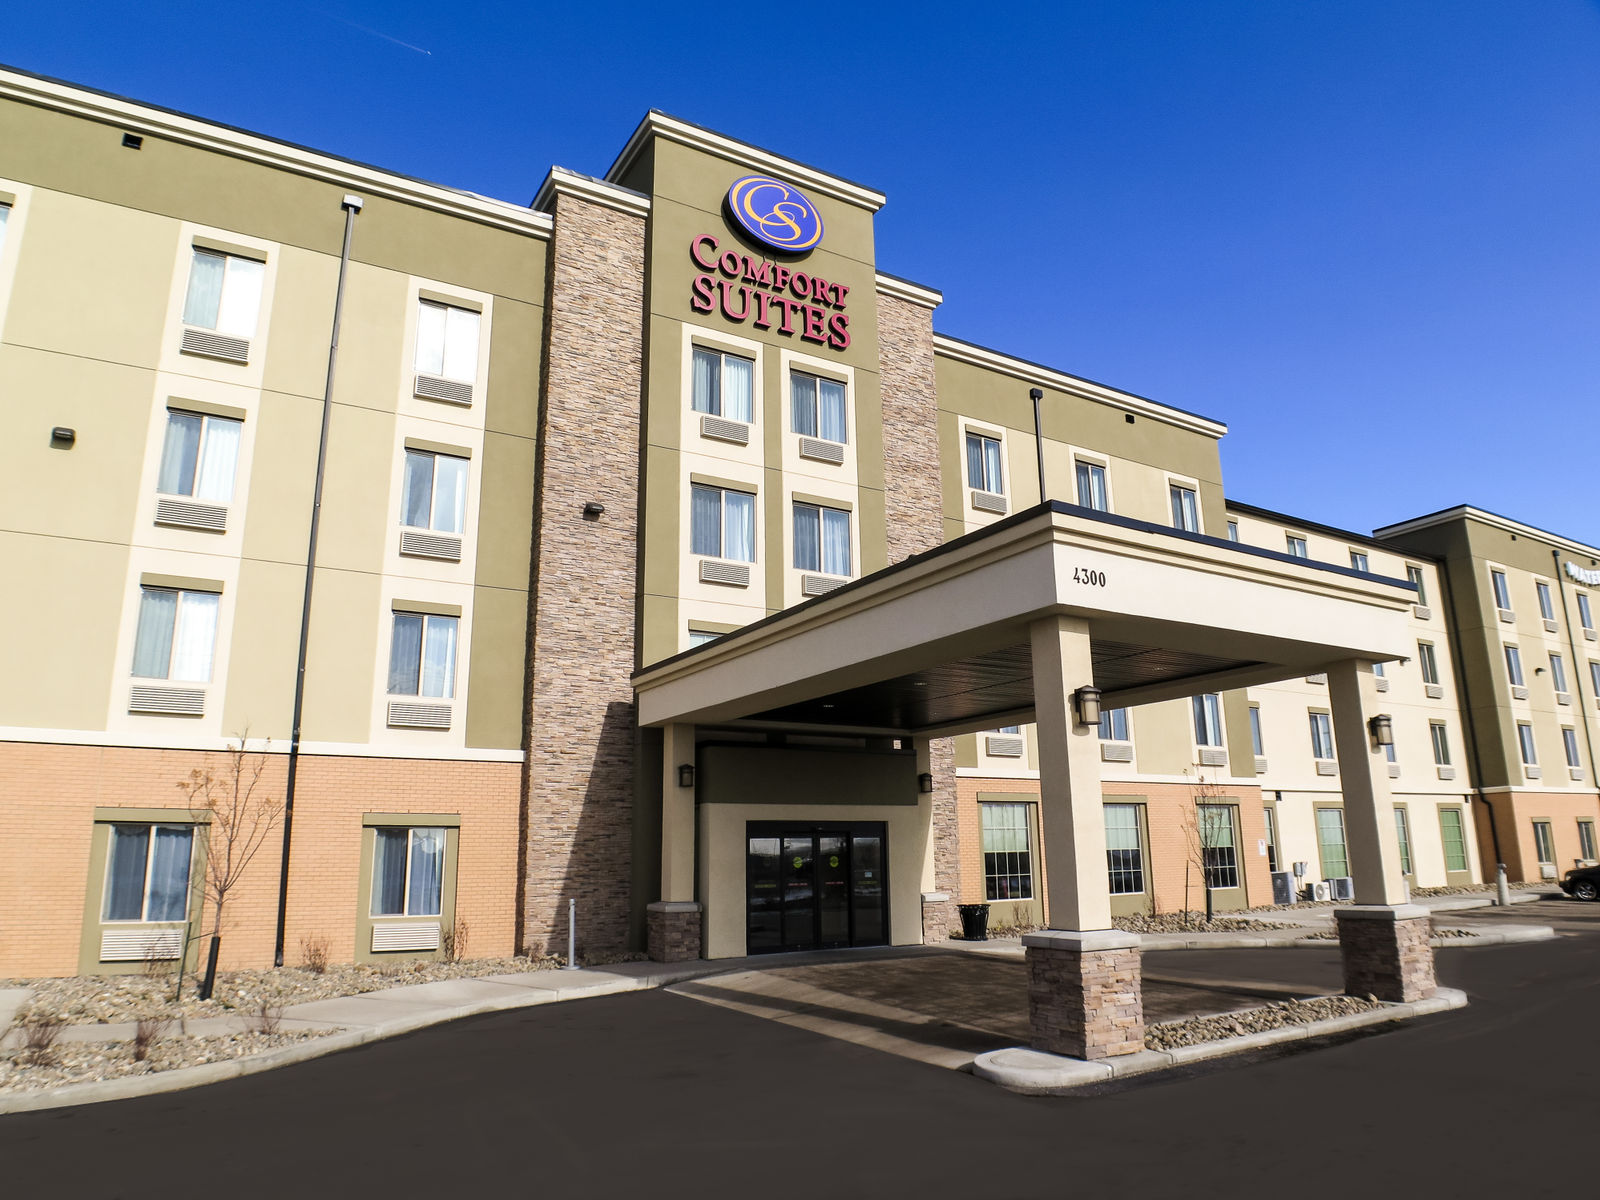 Regina's all-suite hotel with top-notch modern amenities.